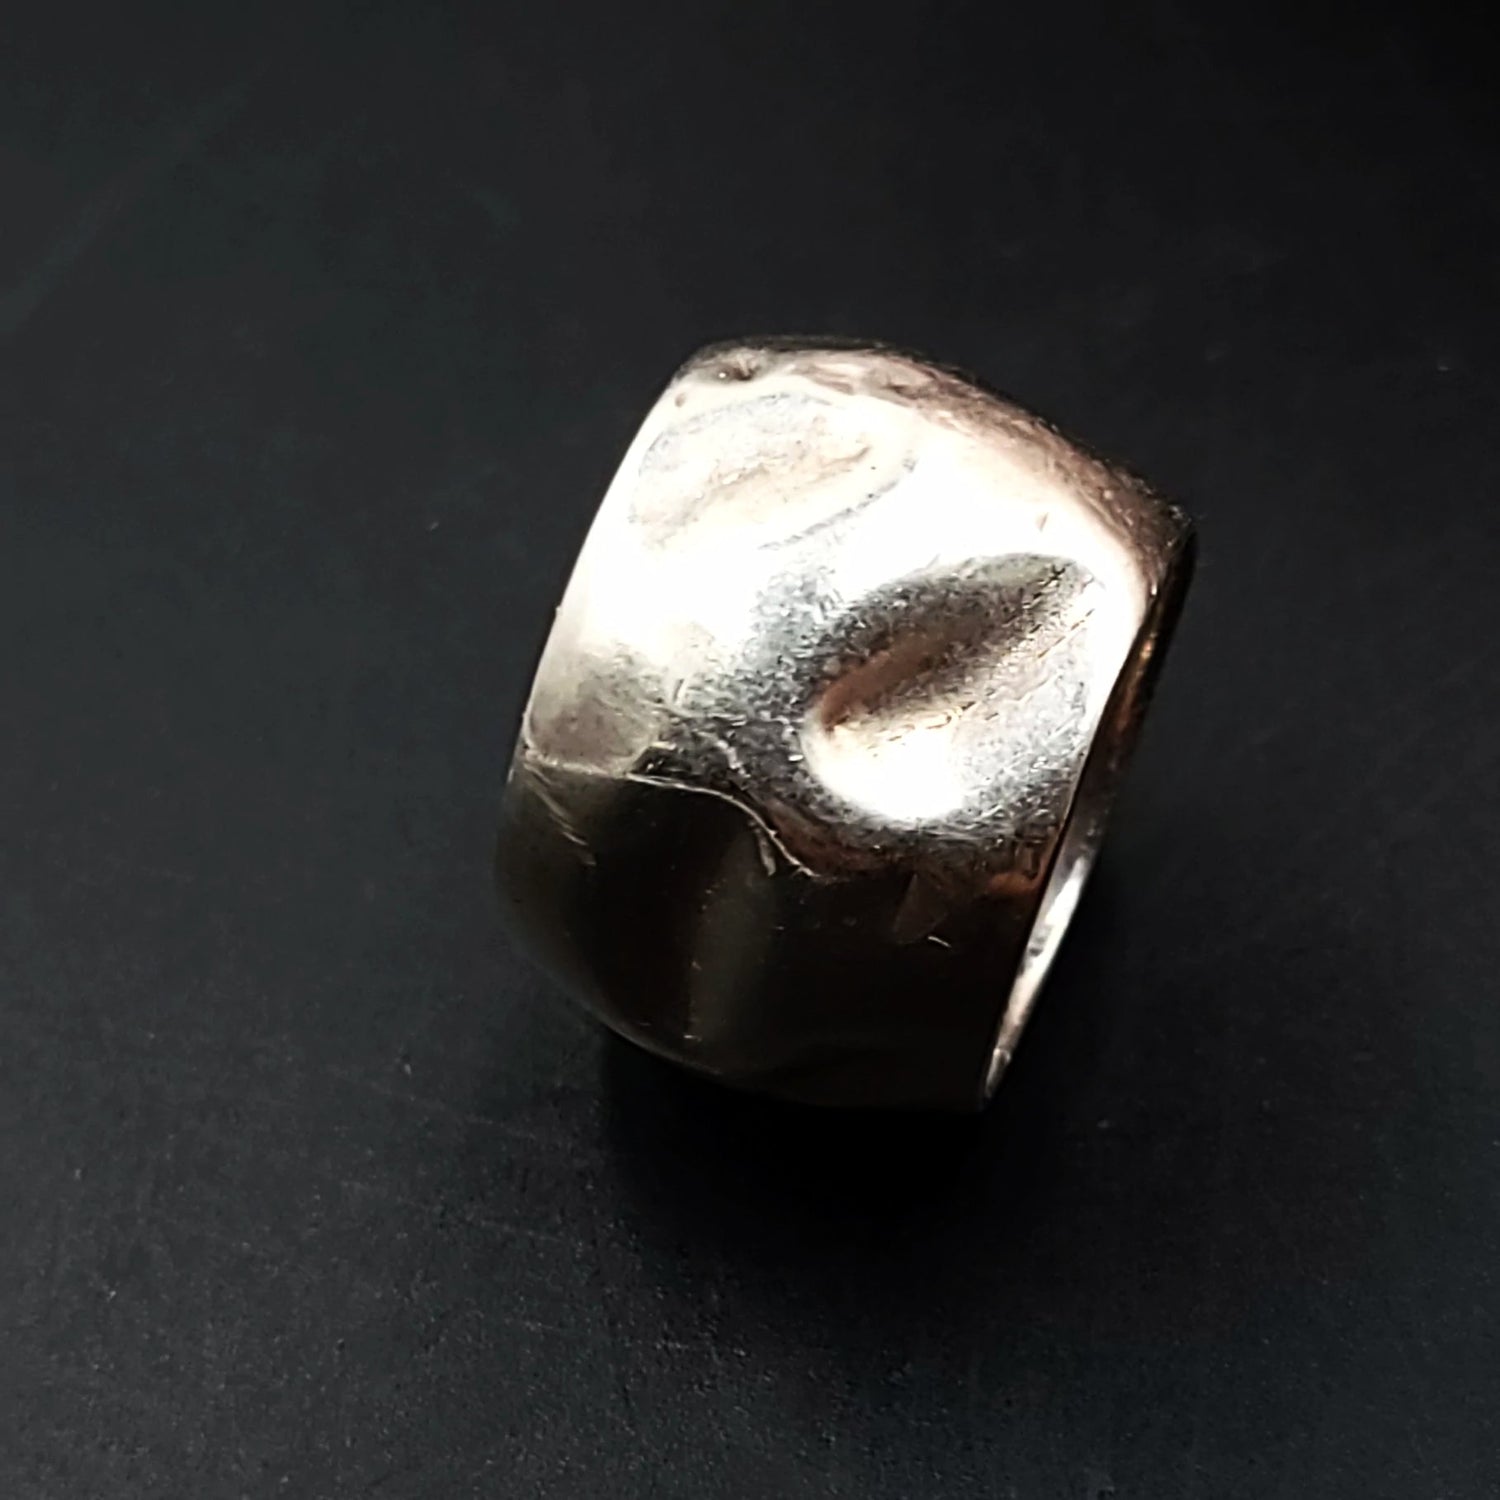 Hammered Free Form Ring Sterling Silver Thick Band - Elevated Metaphysical